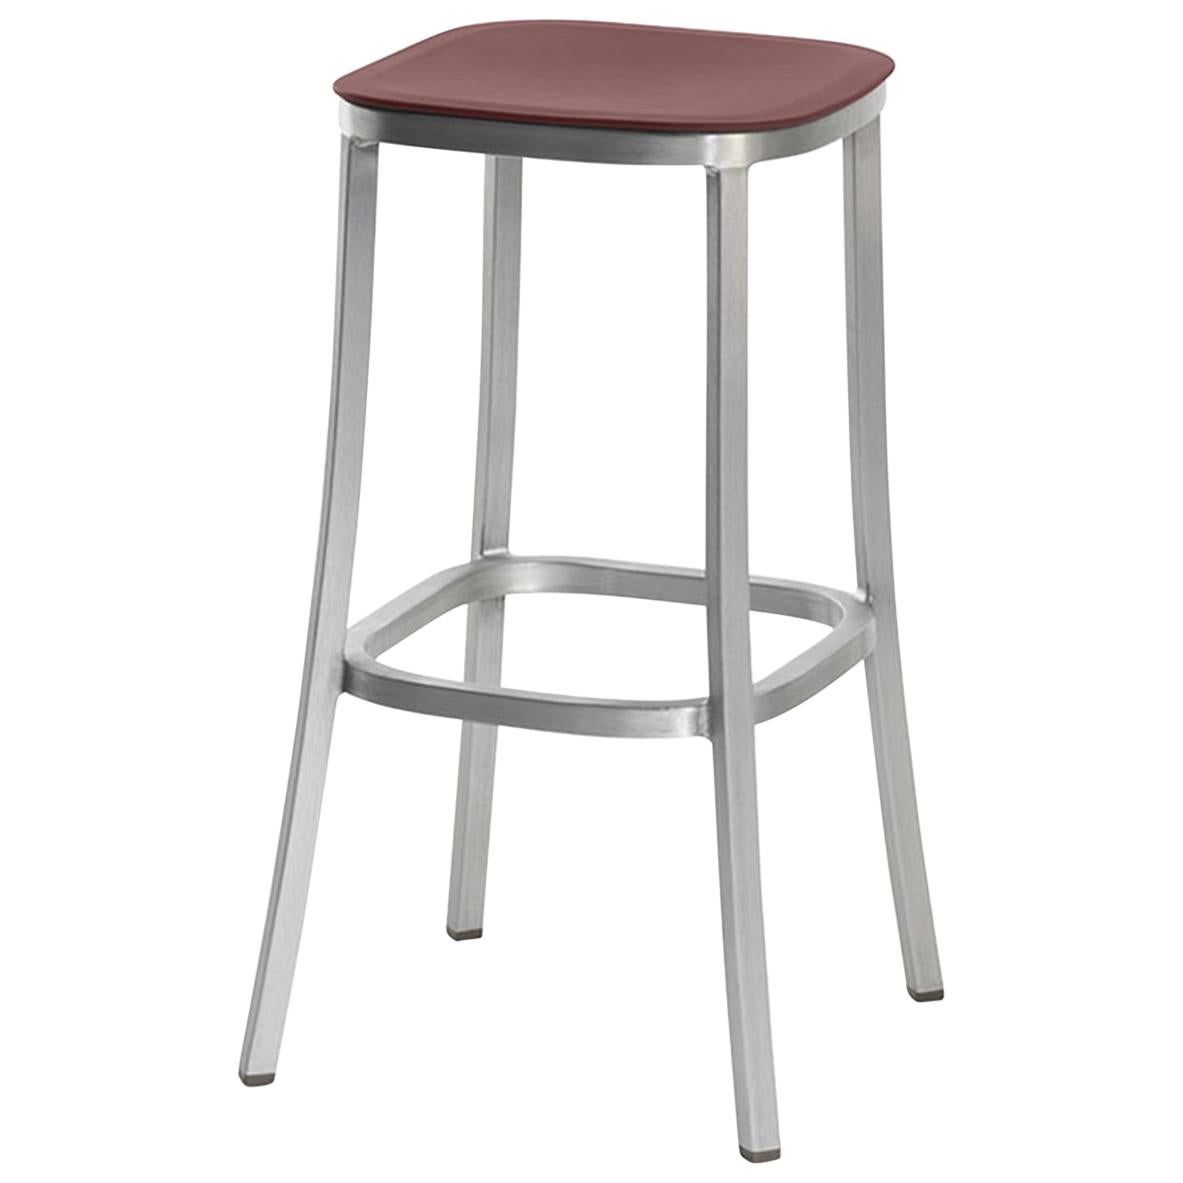 Emeco 1 Inch Barstool in Brushed Aluminum and Bordeaux by Jasper Morrison